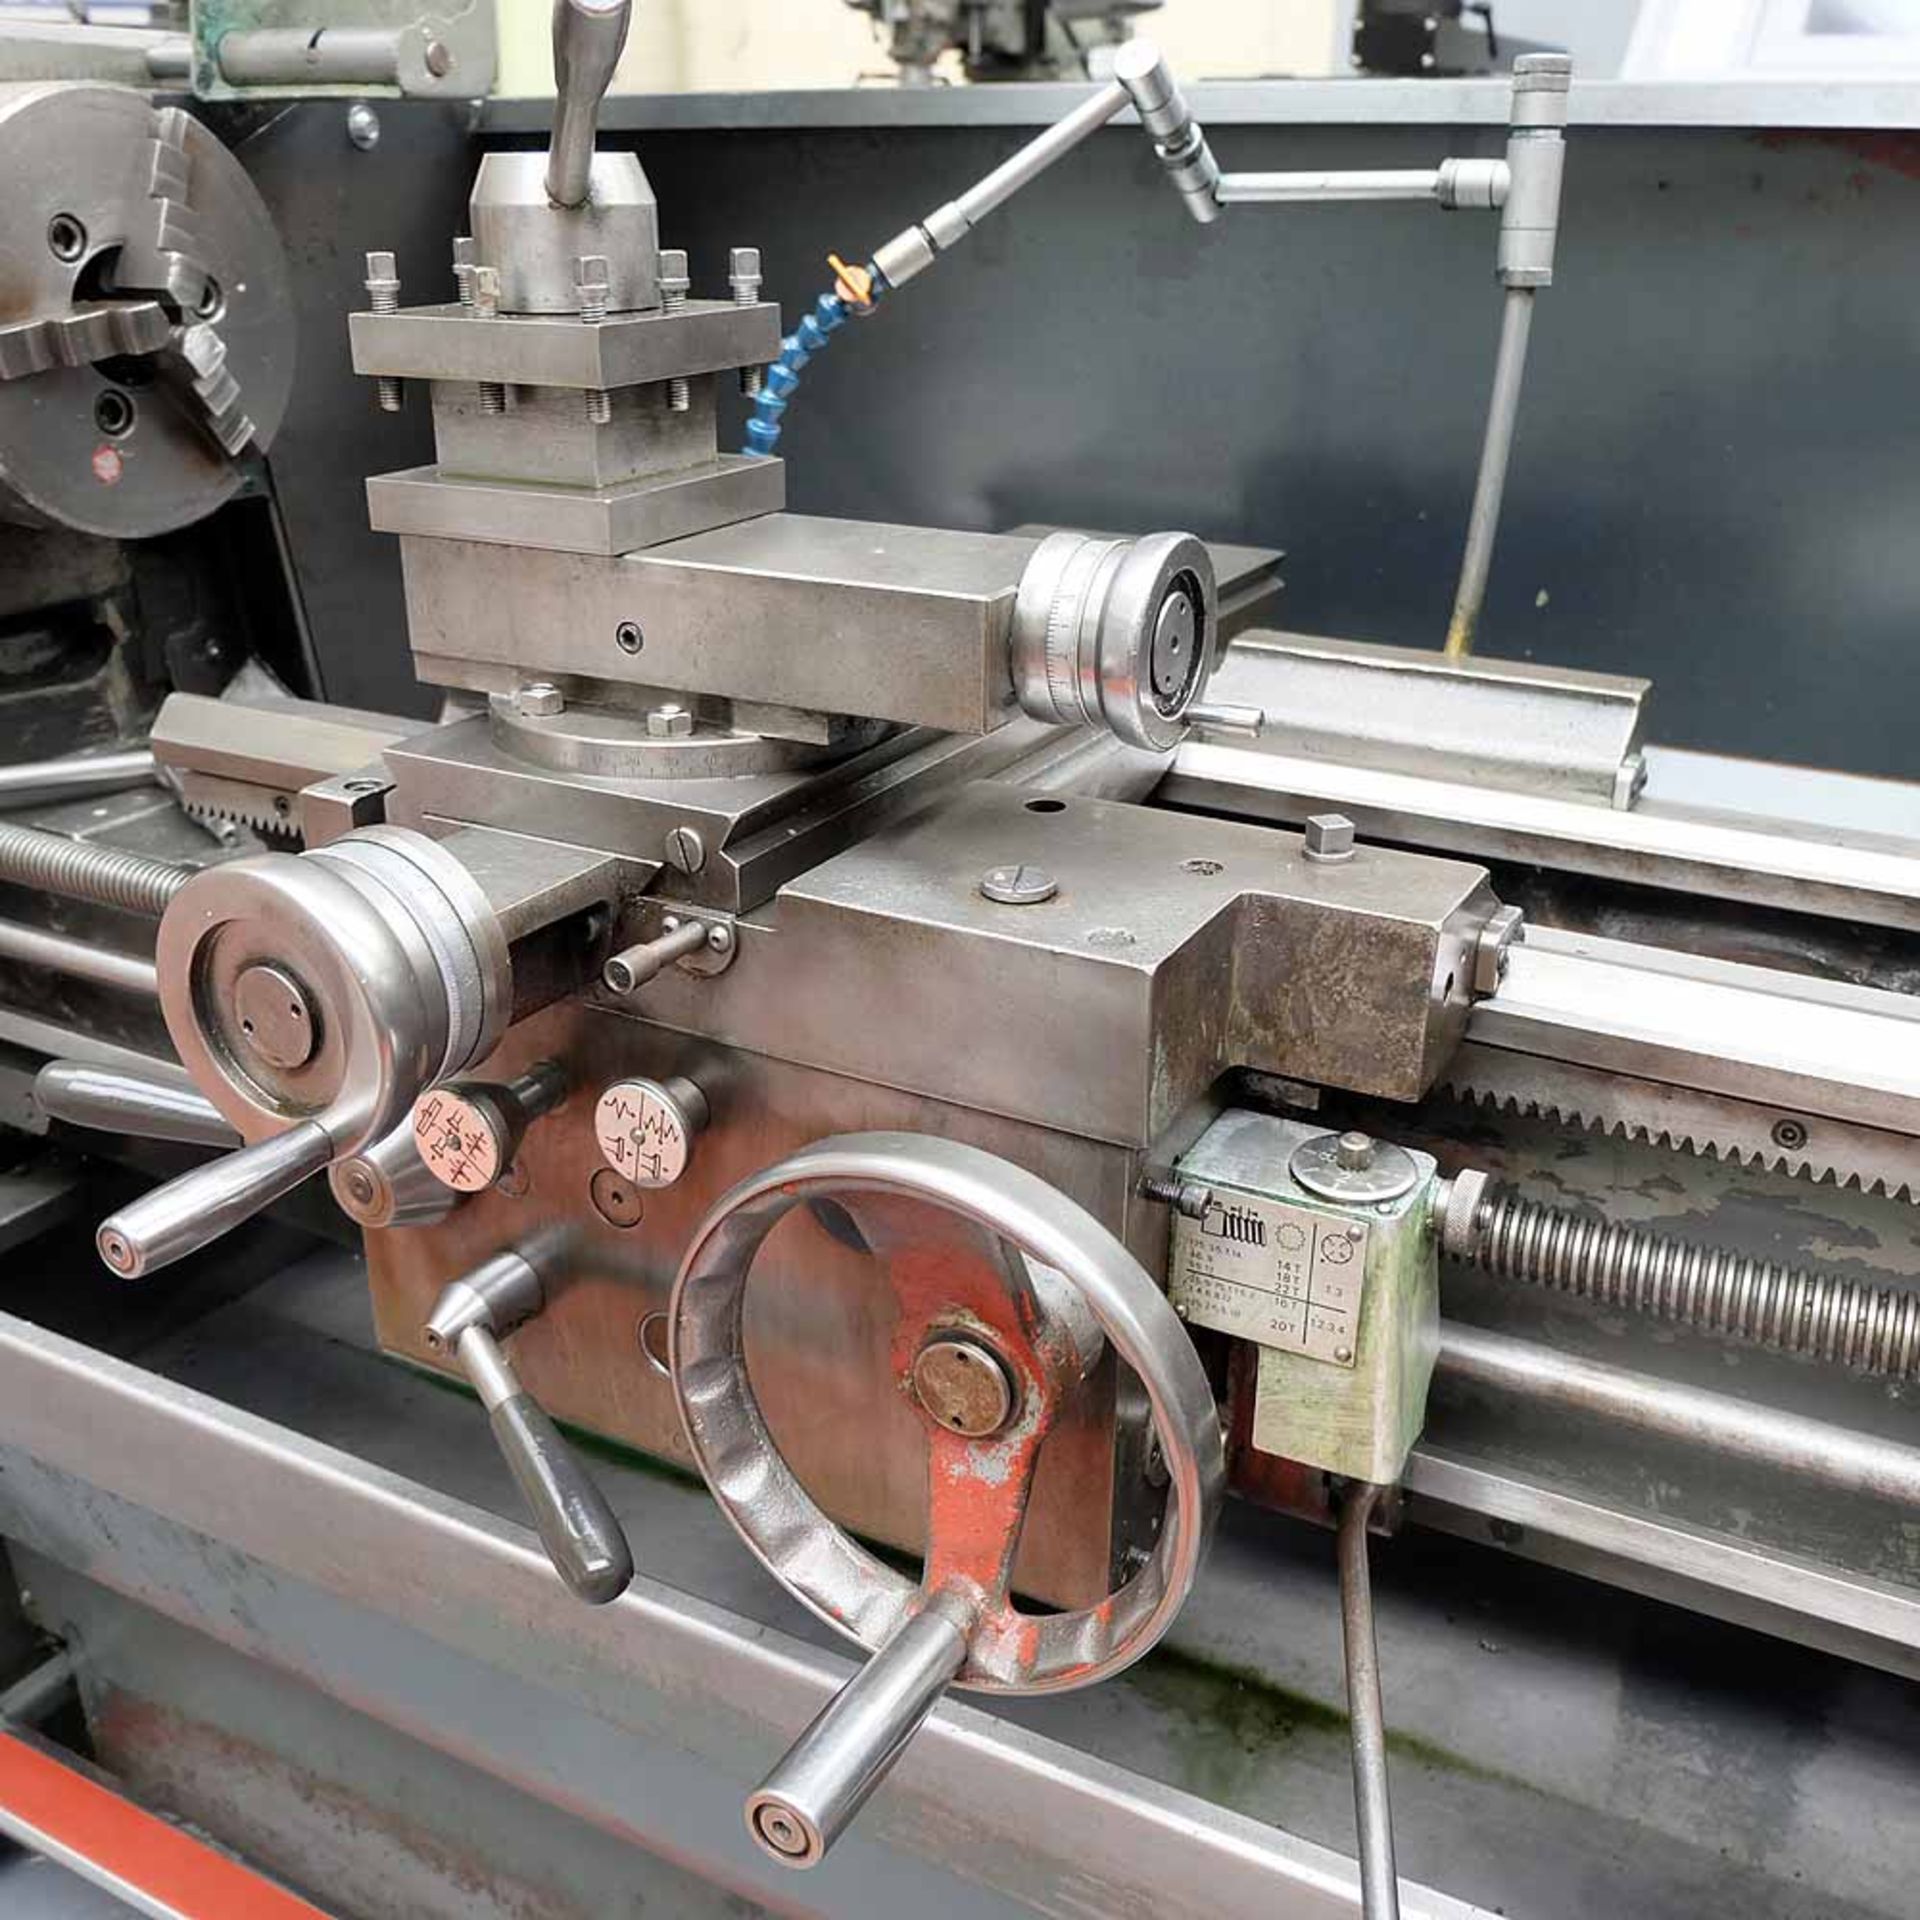 Colchester Triumph 2000 Gap Bed Centre Lathe. Capacity 15" Diameter x 50" Between Centres. - Image 7 of 10